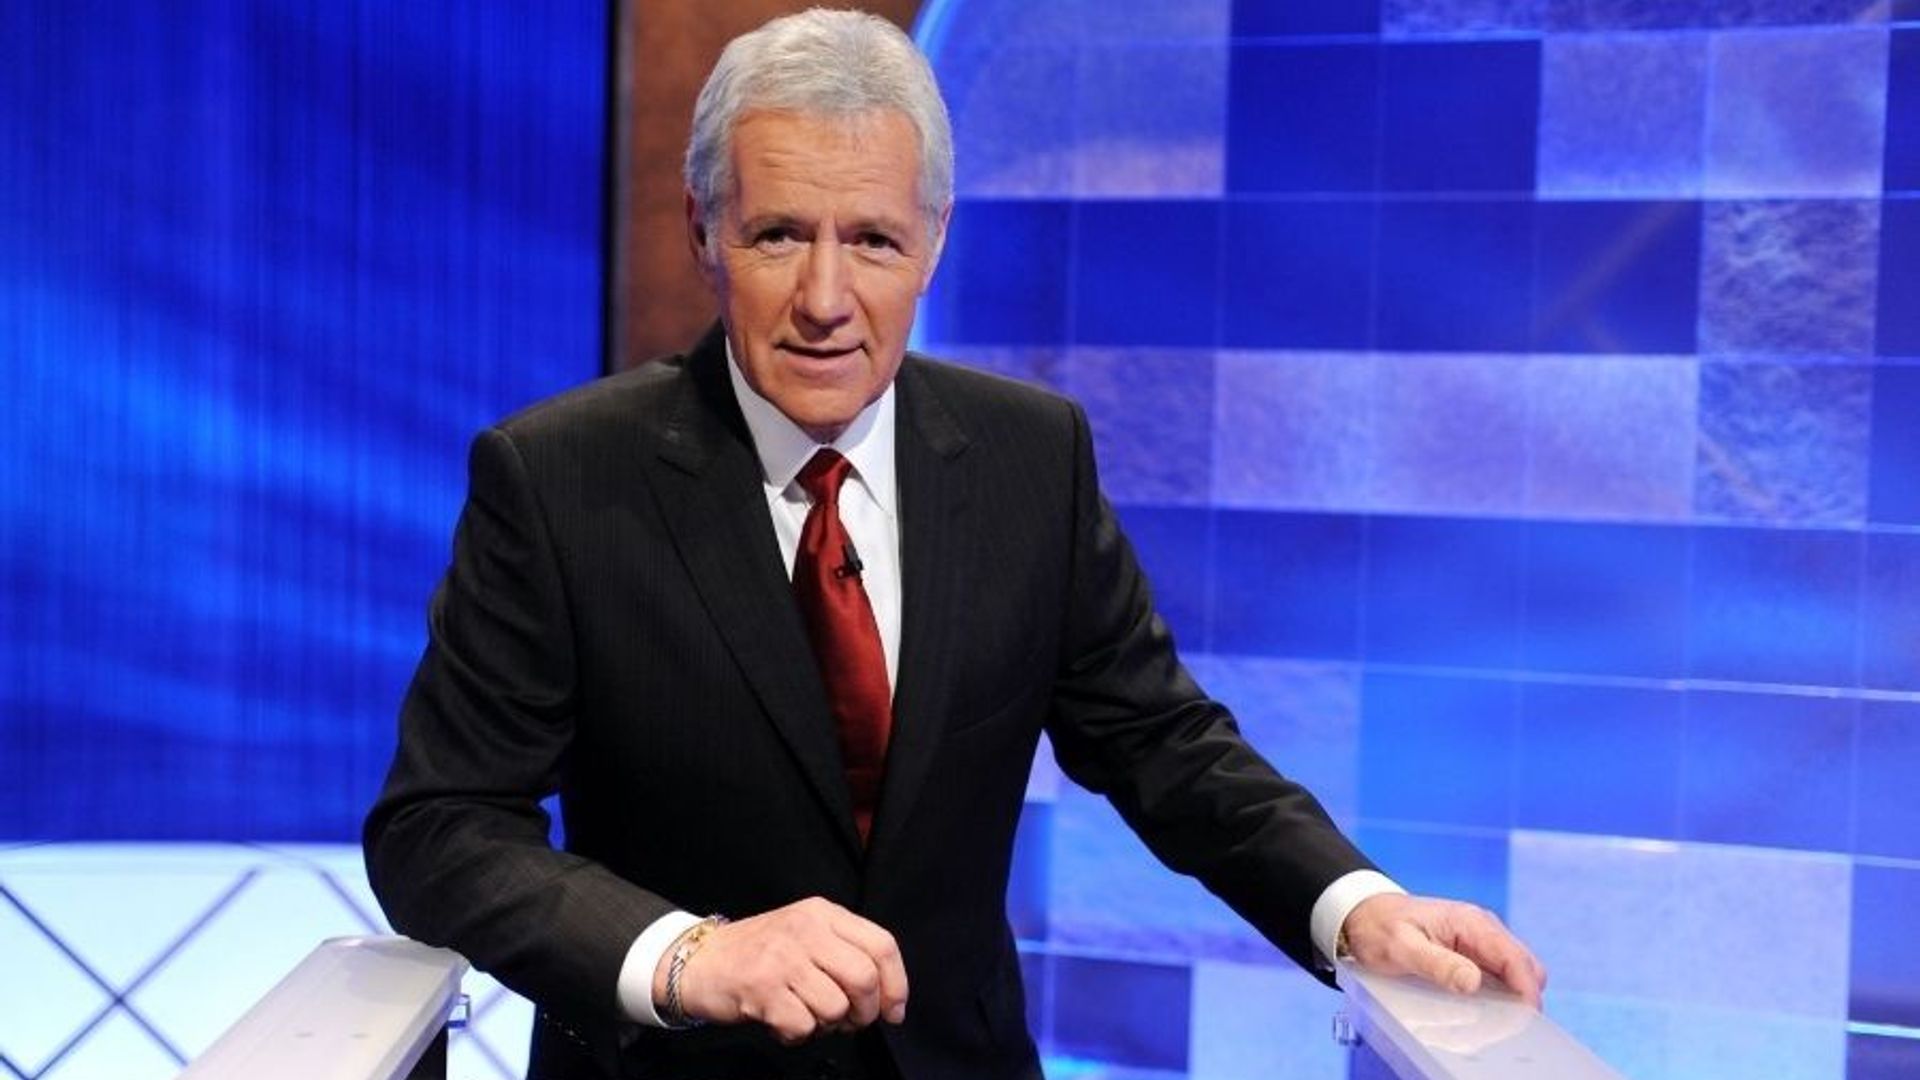 Beloved 'Jeopardy!' host Alex Trebek passes away at age 80 after battle with pancreatic cancer